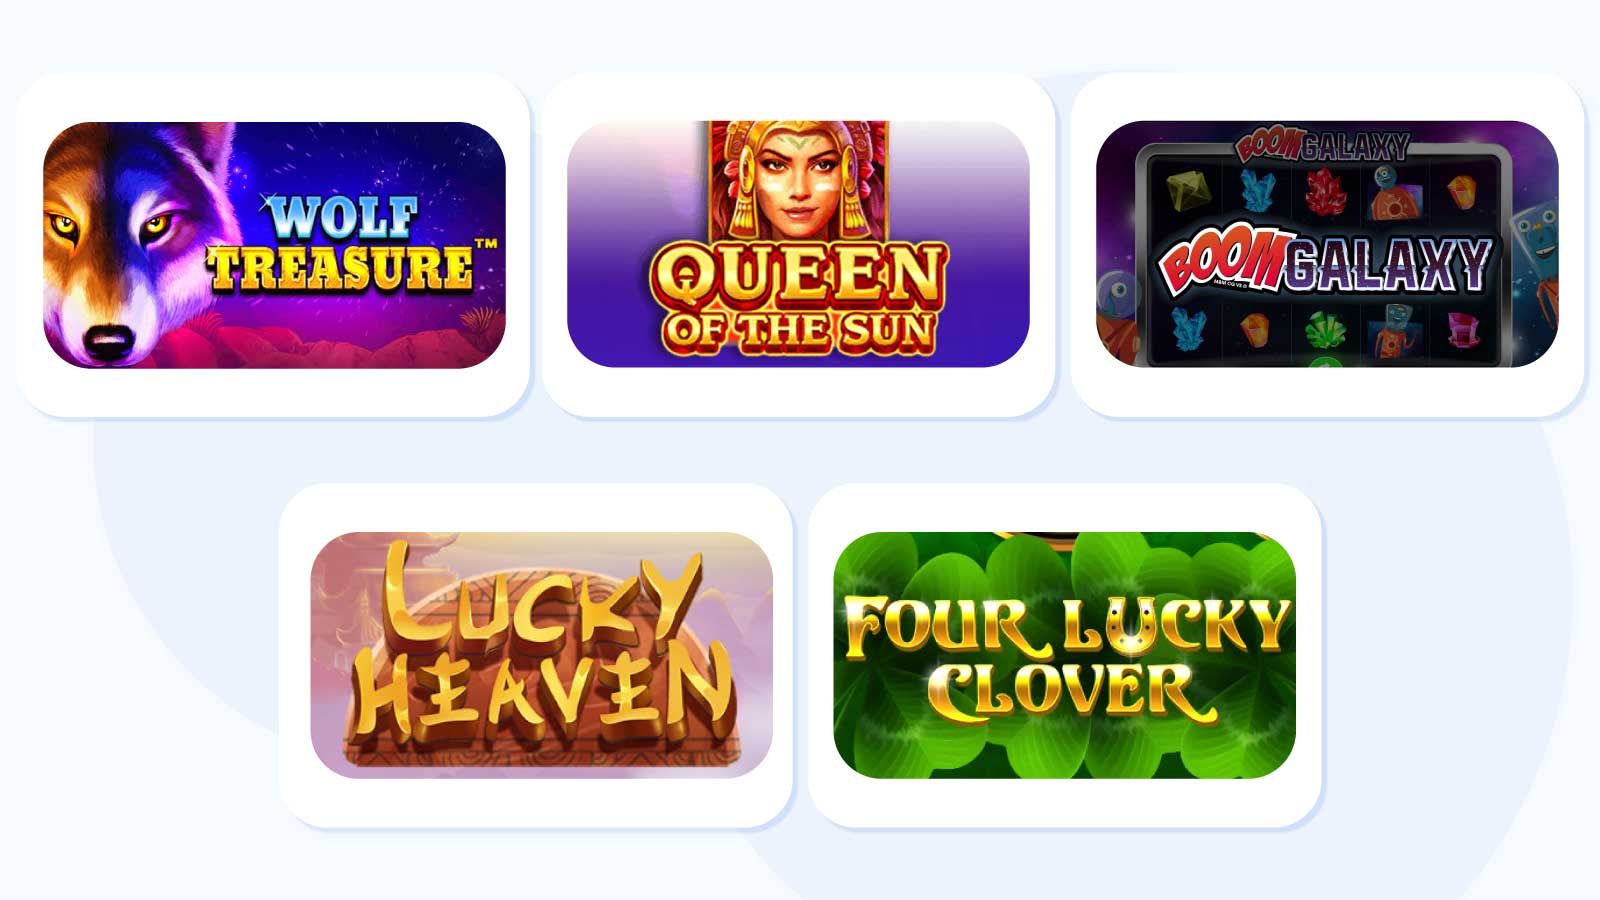 Popular Slots Available to Play with Your No Deposit Offer